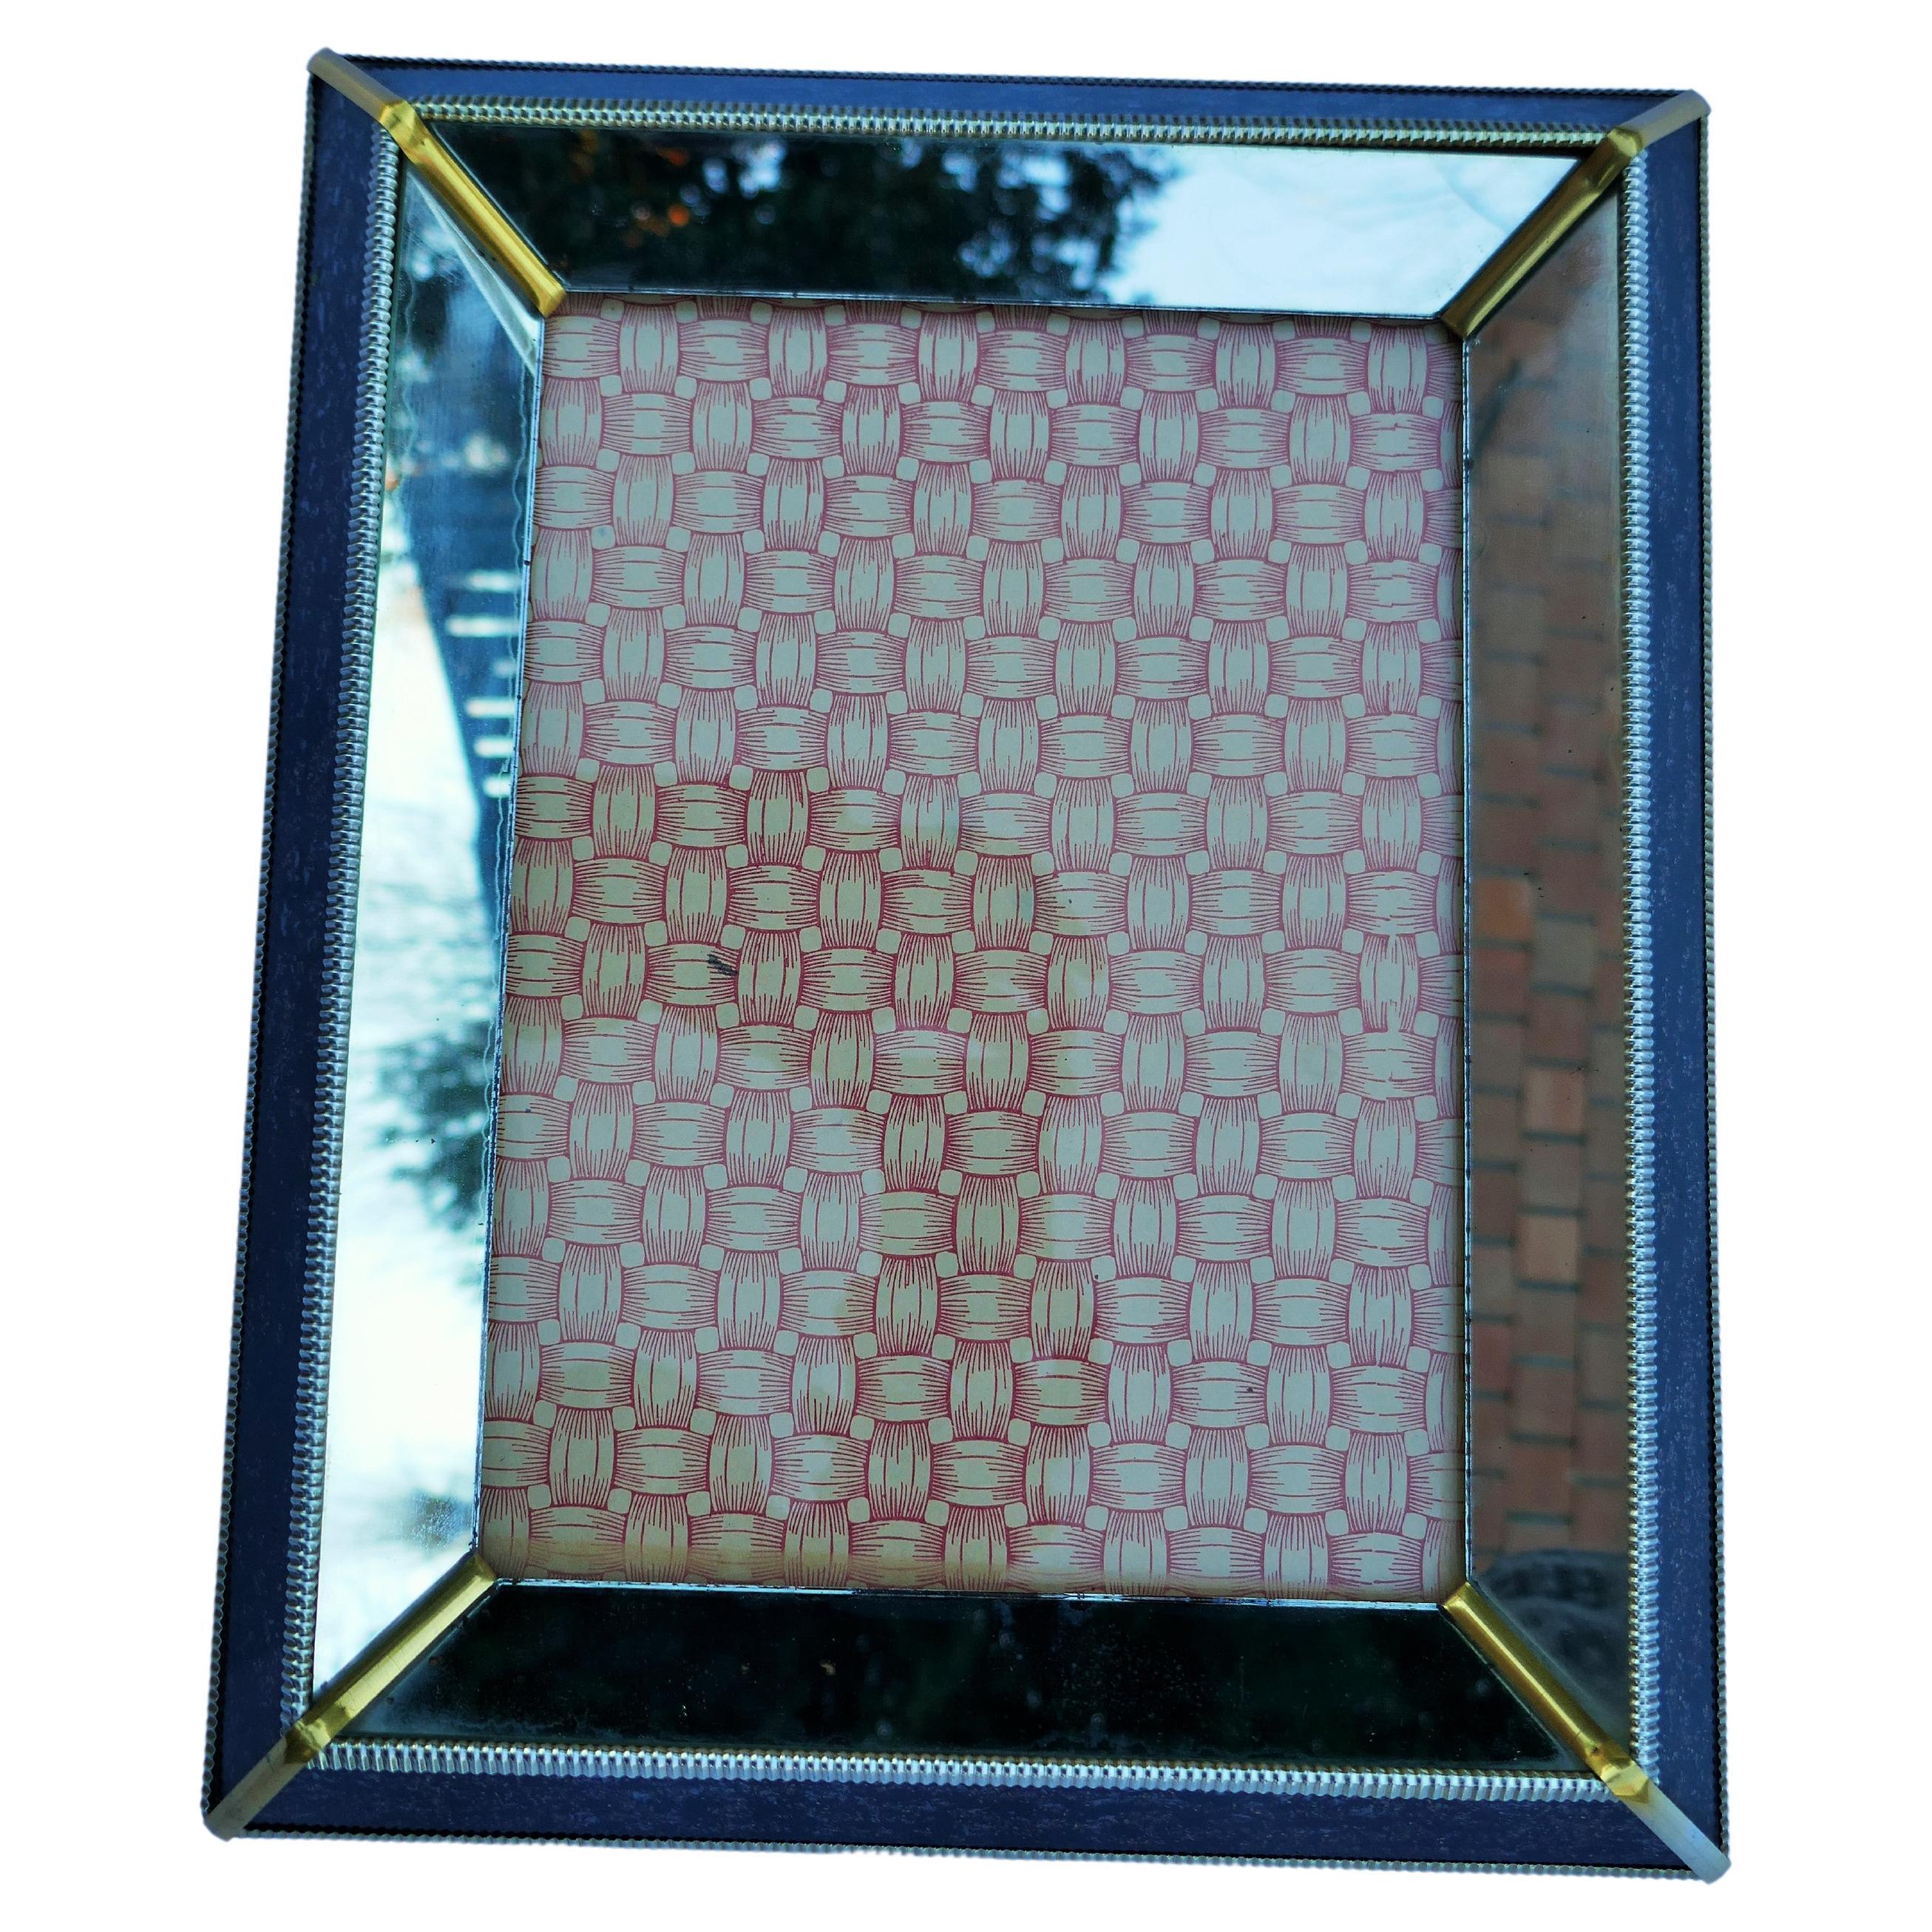 Wood and glass photo frame - Possible Art Deco